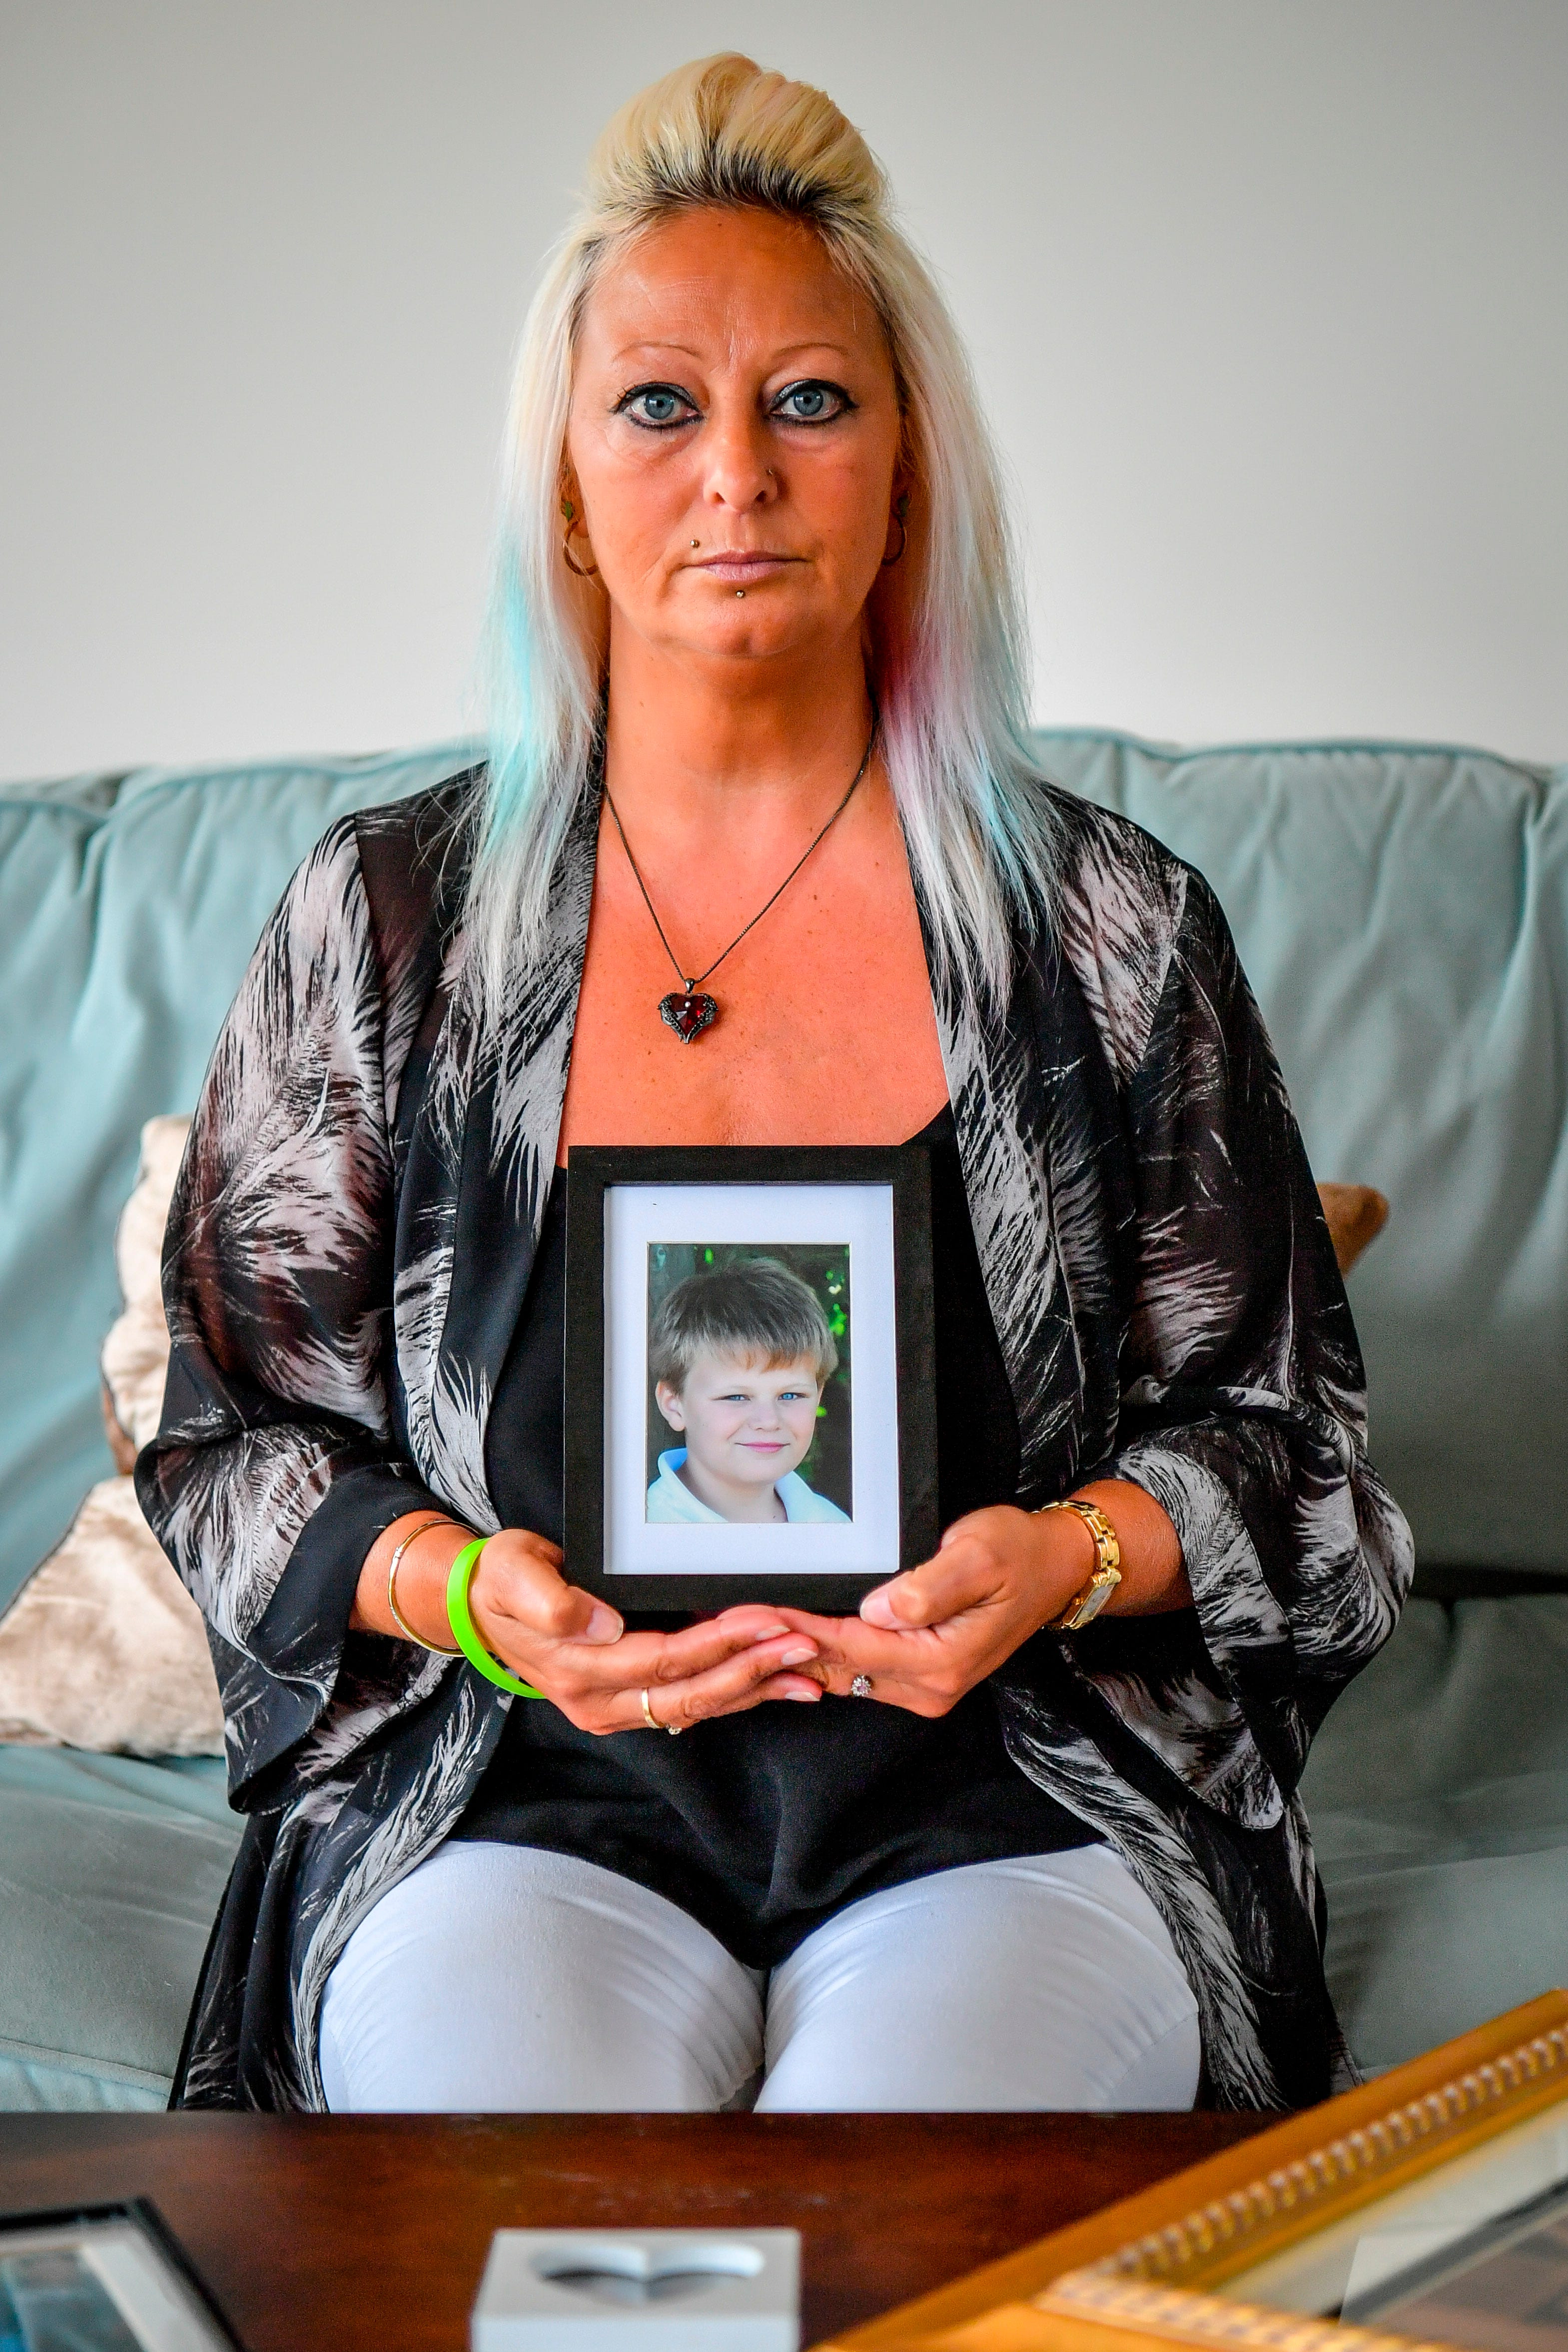 Charlotte Charles, mother of Harry Dunn, holds a photograph of Harry at 14 years old. Dunn, 19, was killed when his motorbike crashed into a car being driven on the wrong side of the road by American Anne Sacoolas.